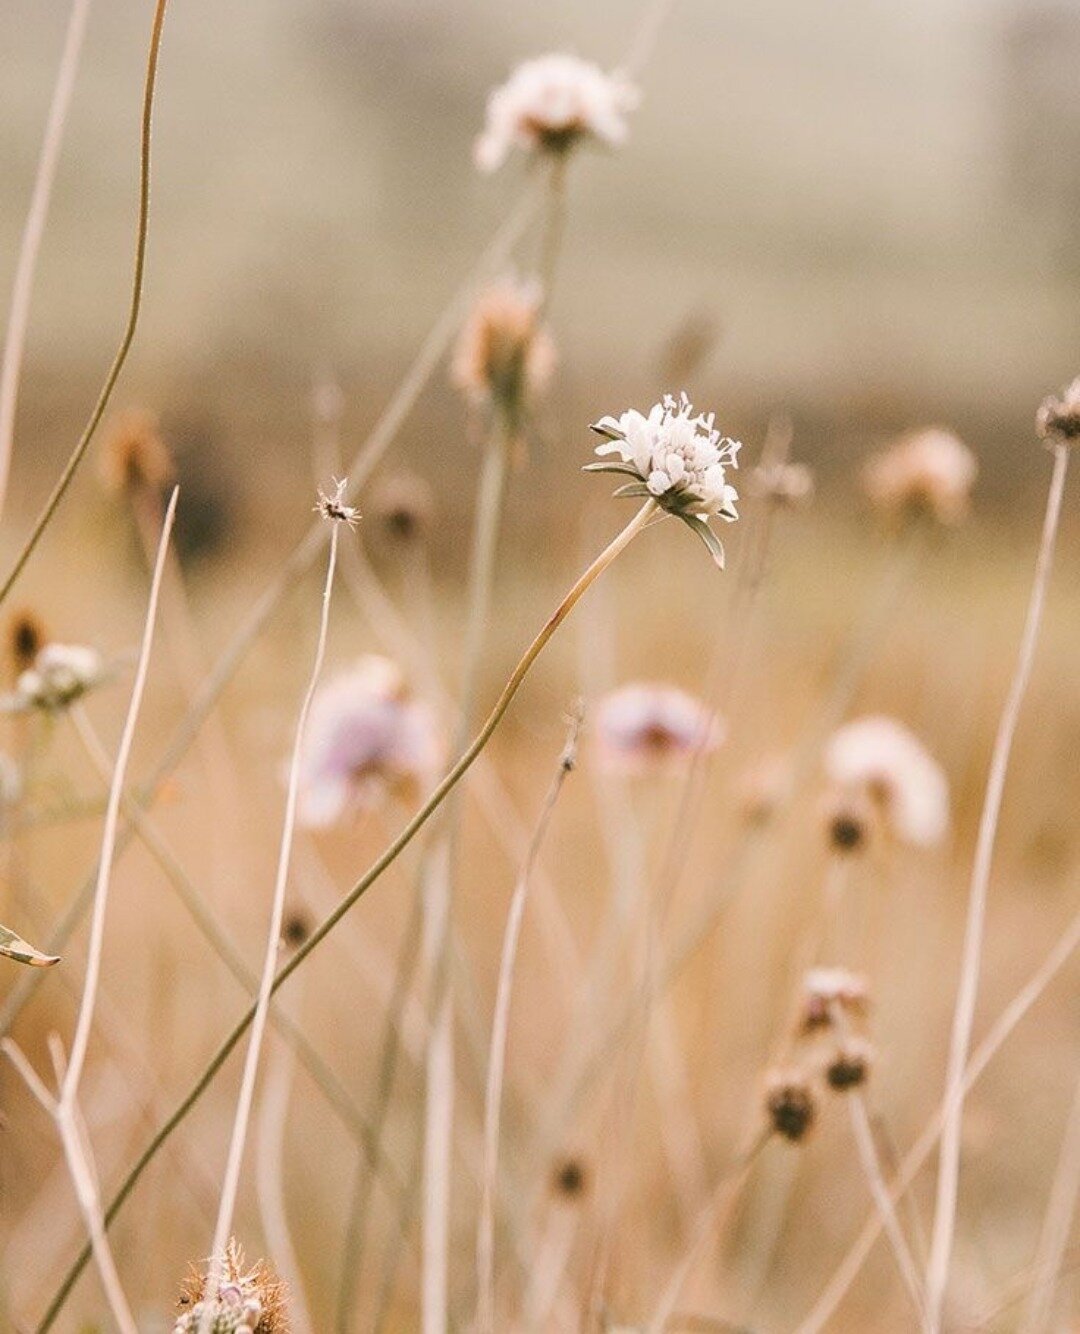 At Henley Naturals we are deeply passionate about reconnecting individuals with nature for holistic well-being. Our brand revolves around the idea of returning to the garden, embracing our relationship with the plant world, and recognising the insepa